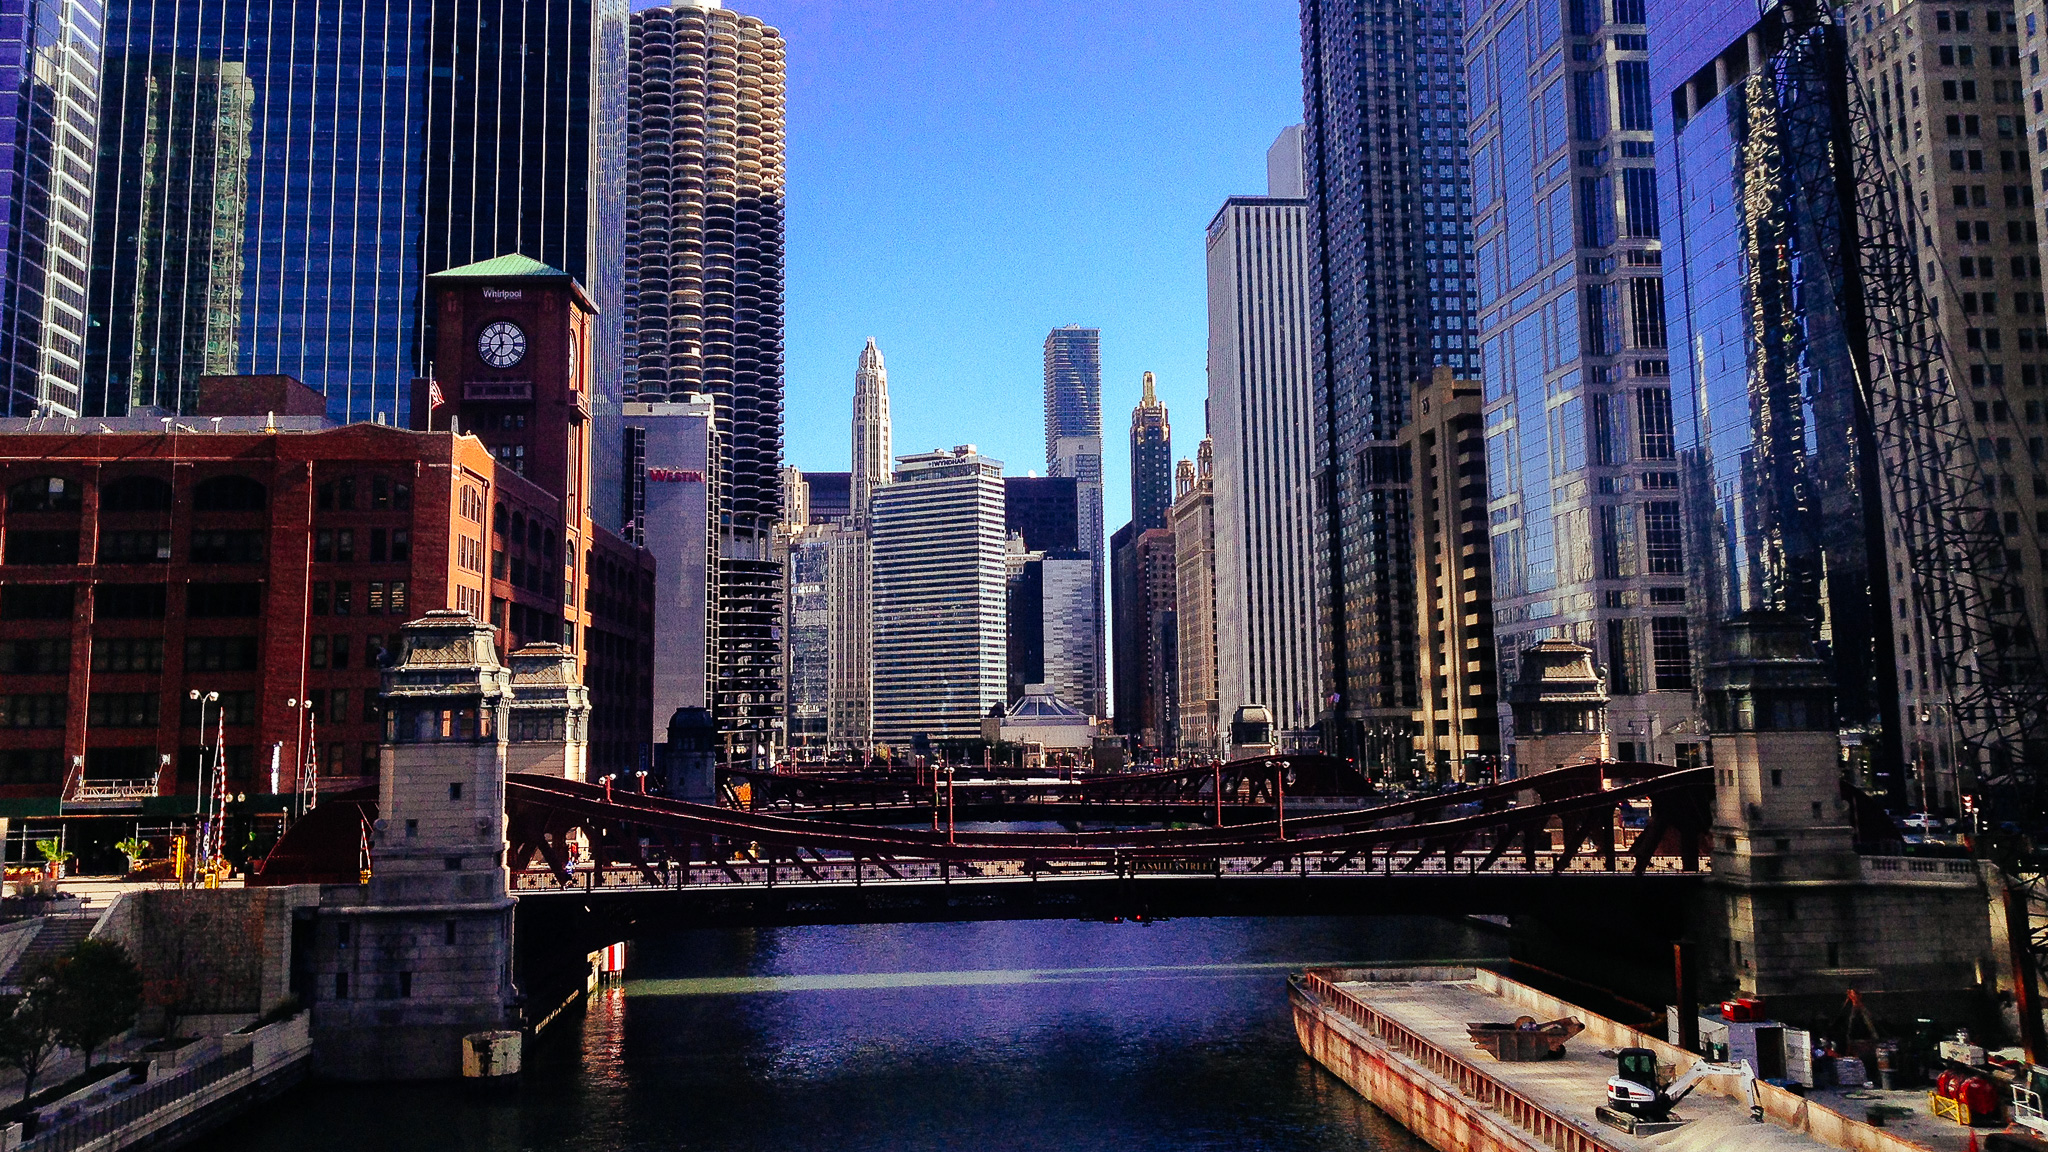 Chicago as seen from from the Loop (November 2015), with one of Bertrand Goldberg's iconic Marina City towers